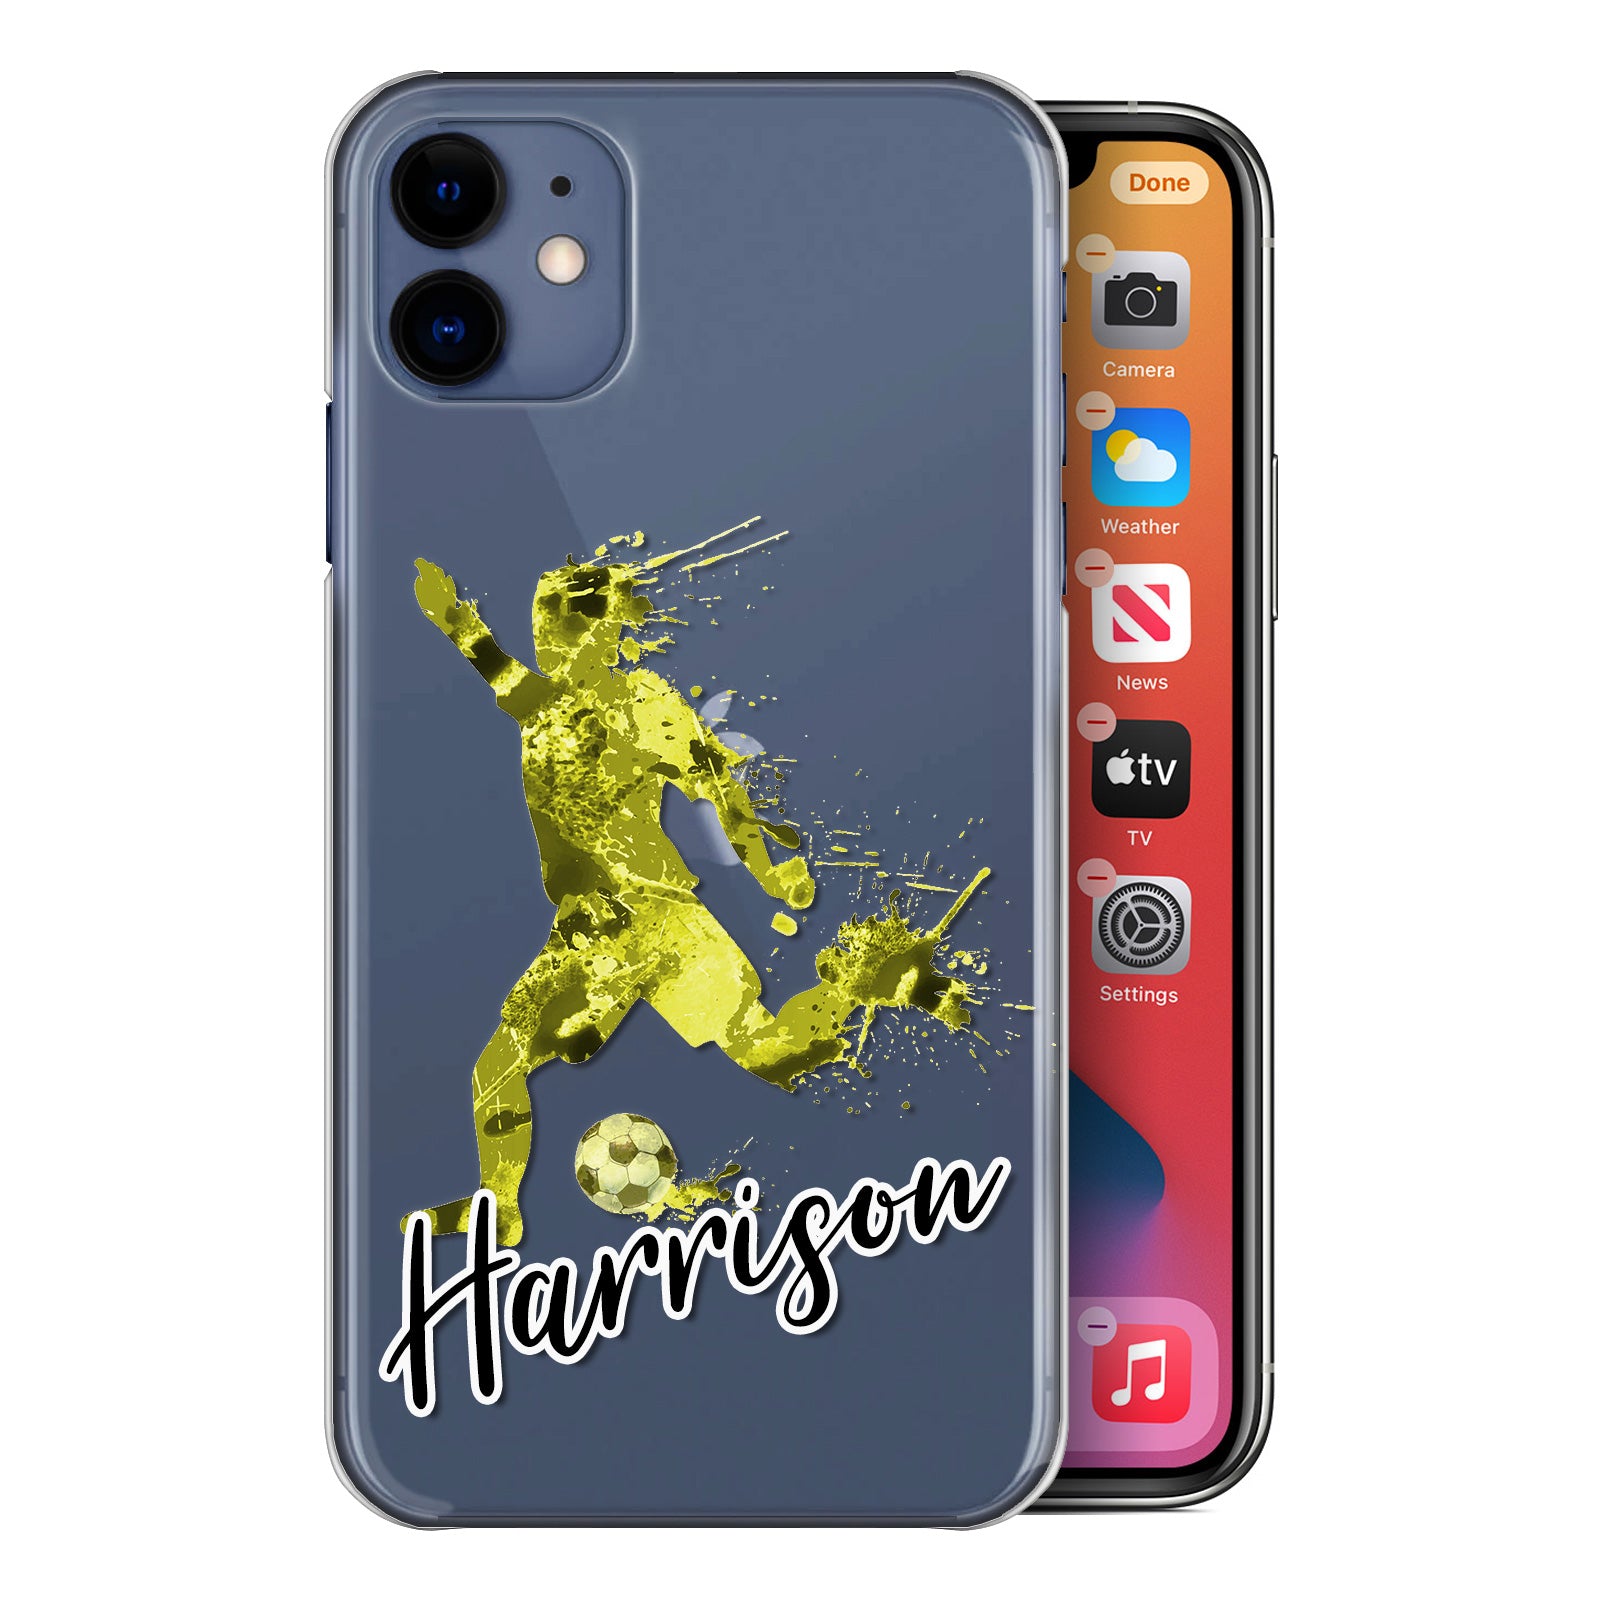 Personalised One Phone Hard Case - Zesty Yellow Football Star with White Outlined Text